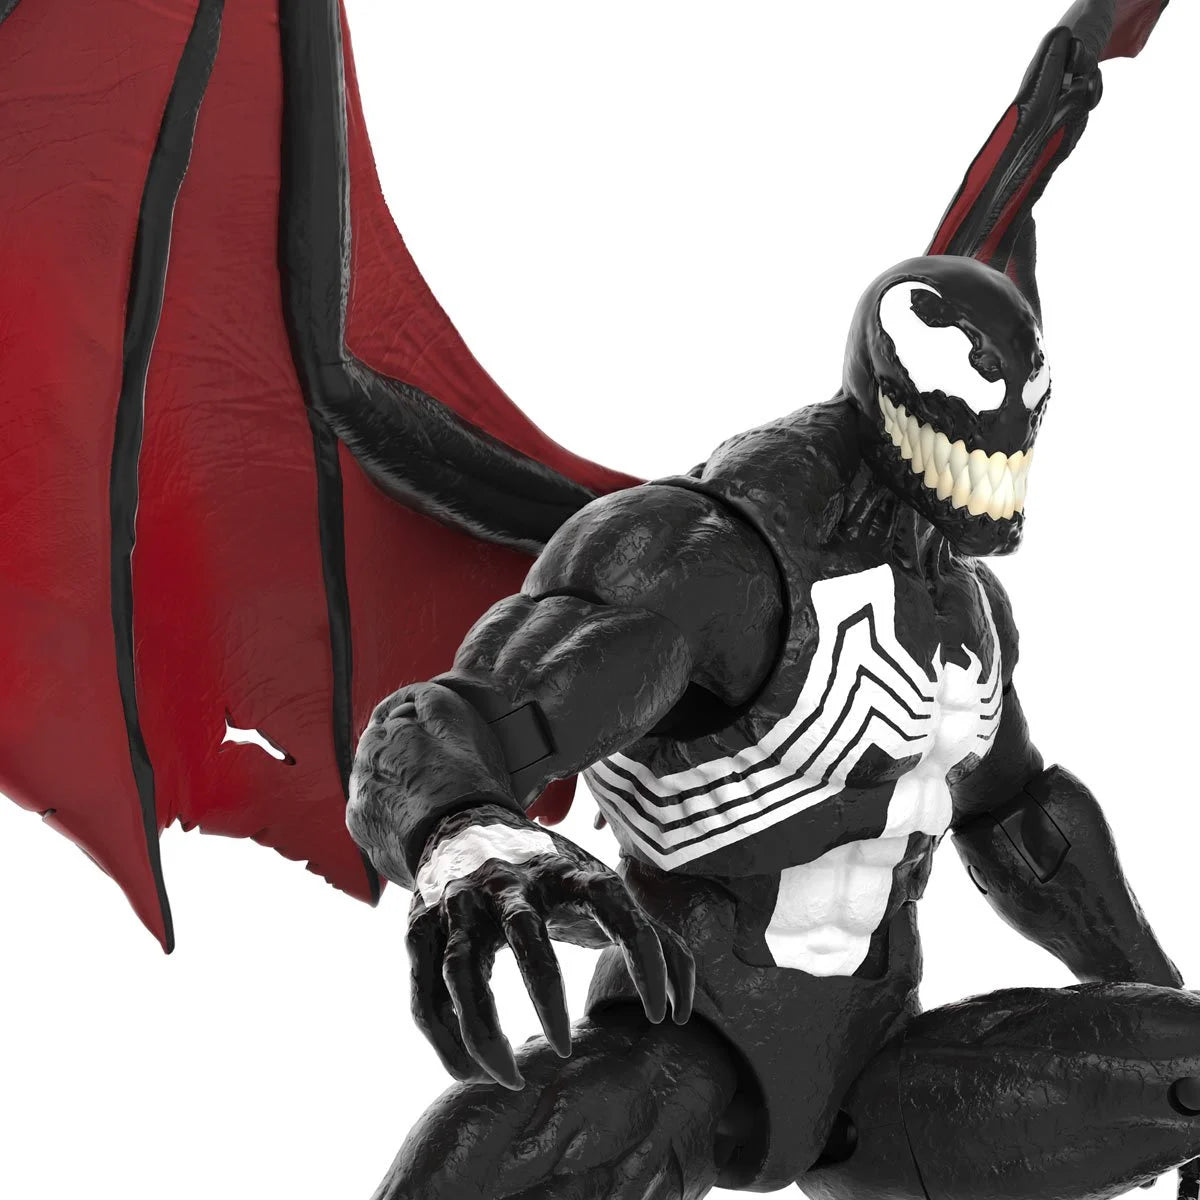 Marvel legends Pack Knull and Venom 6 Inch Action Figure